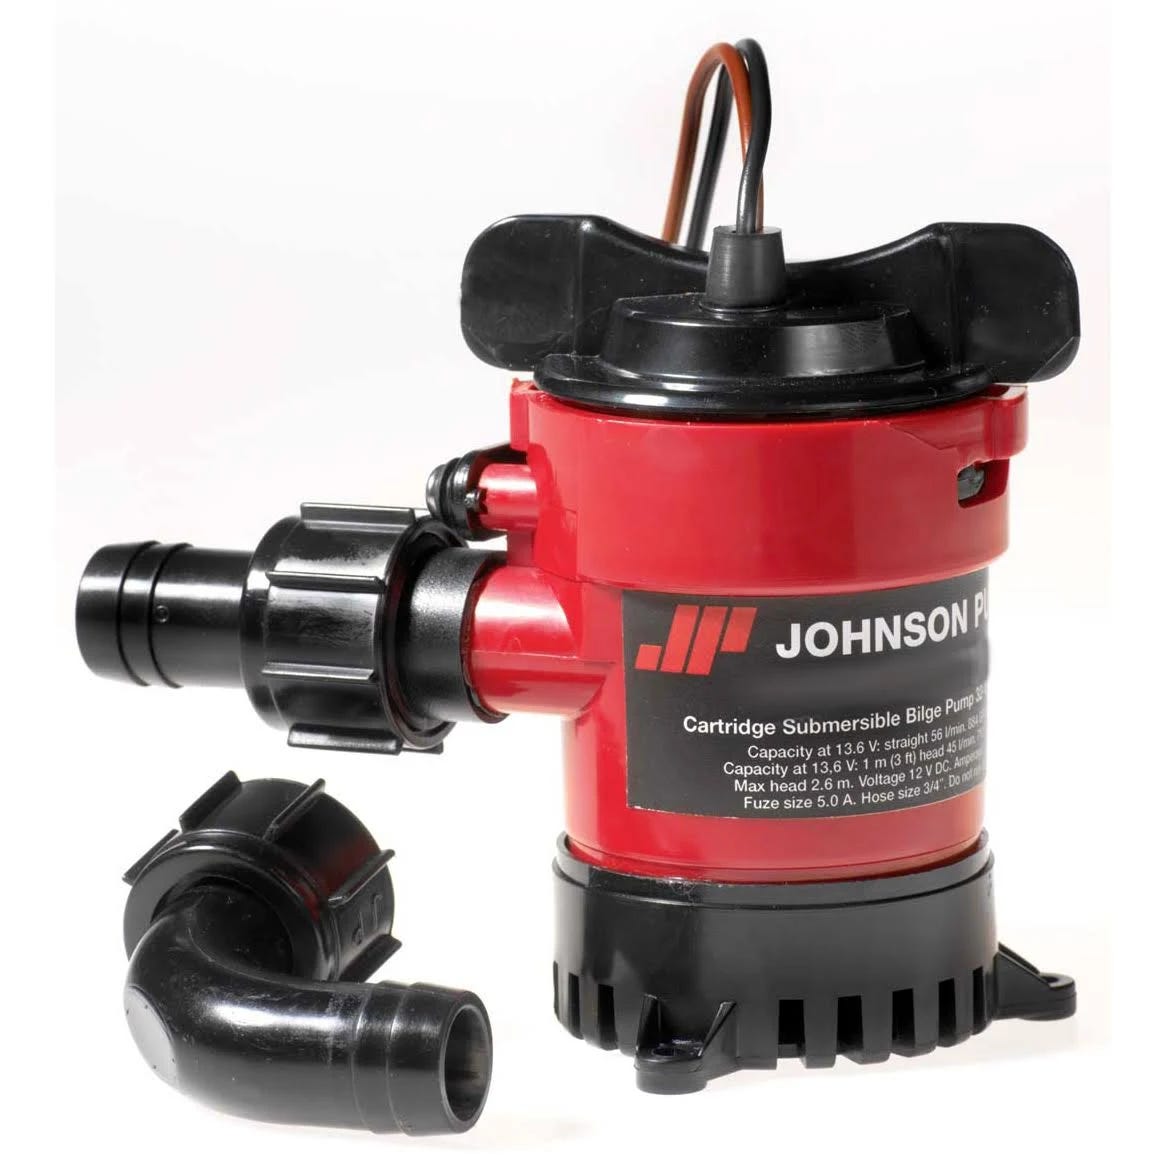 High-Capacity, Submersible Bilge Pump with Dura-Port Discharge Port | Image